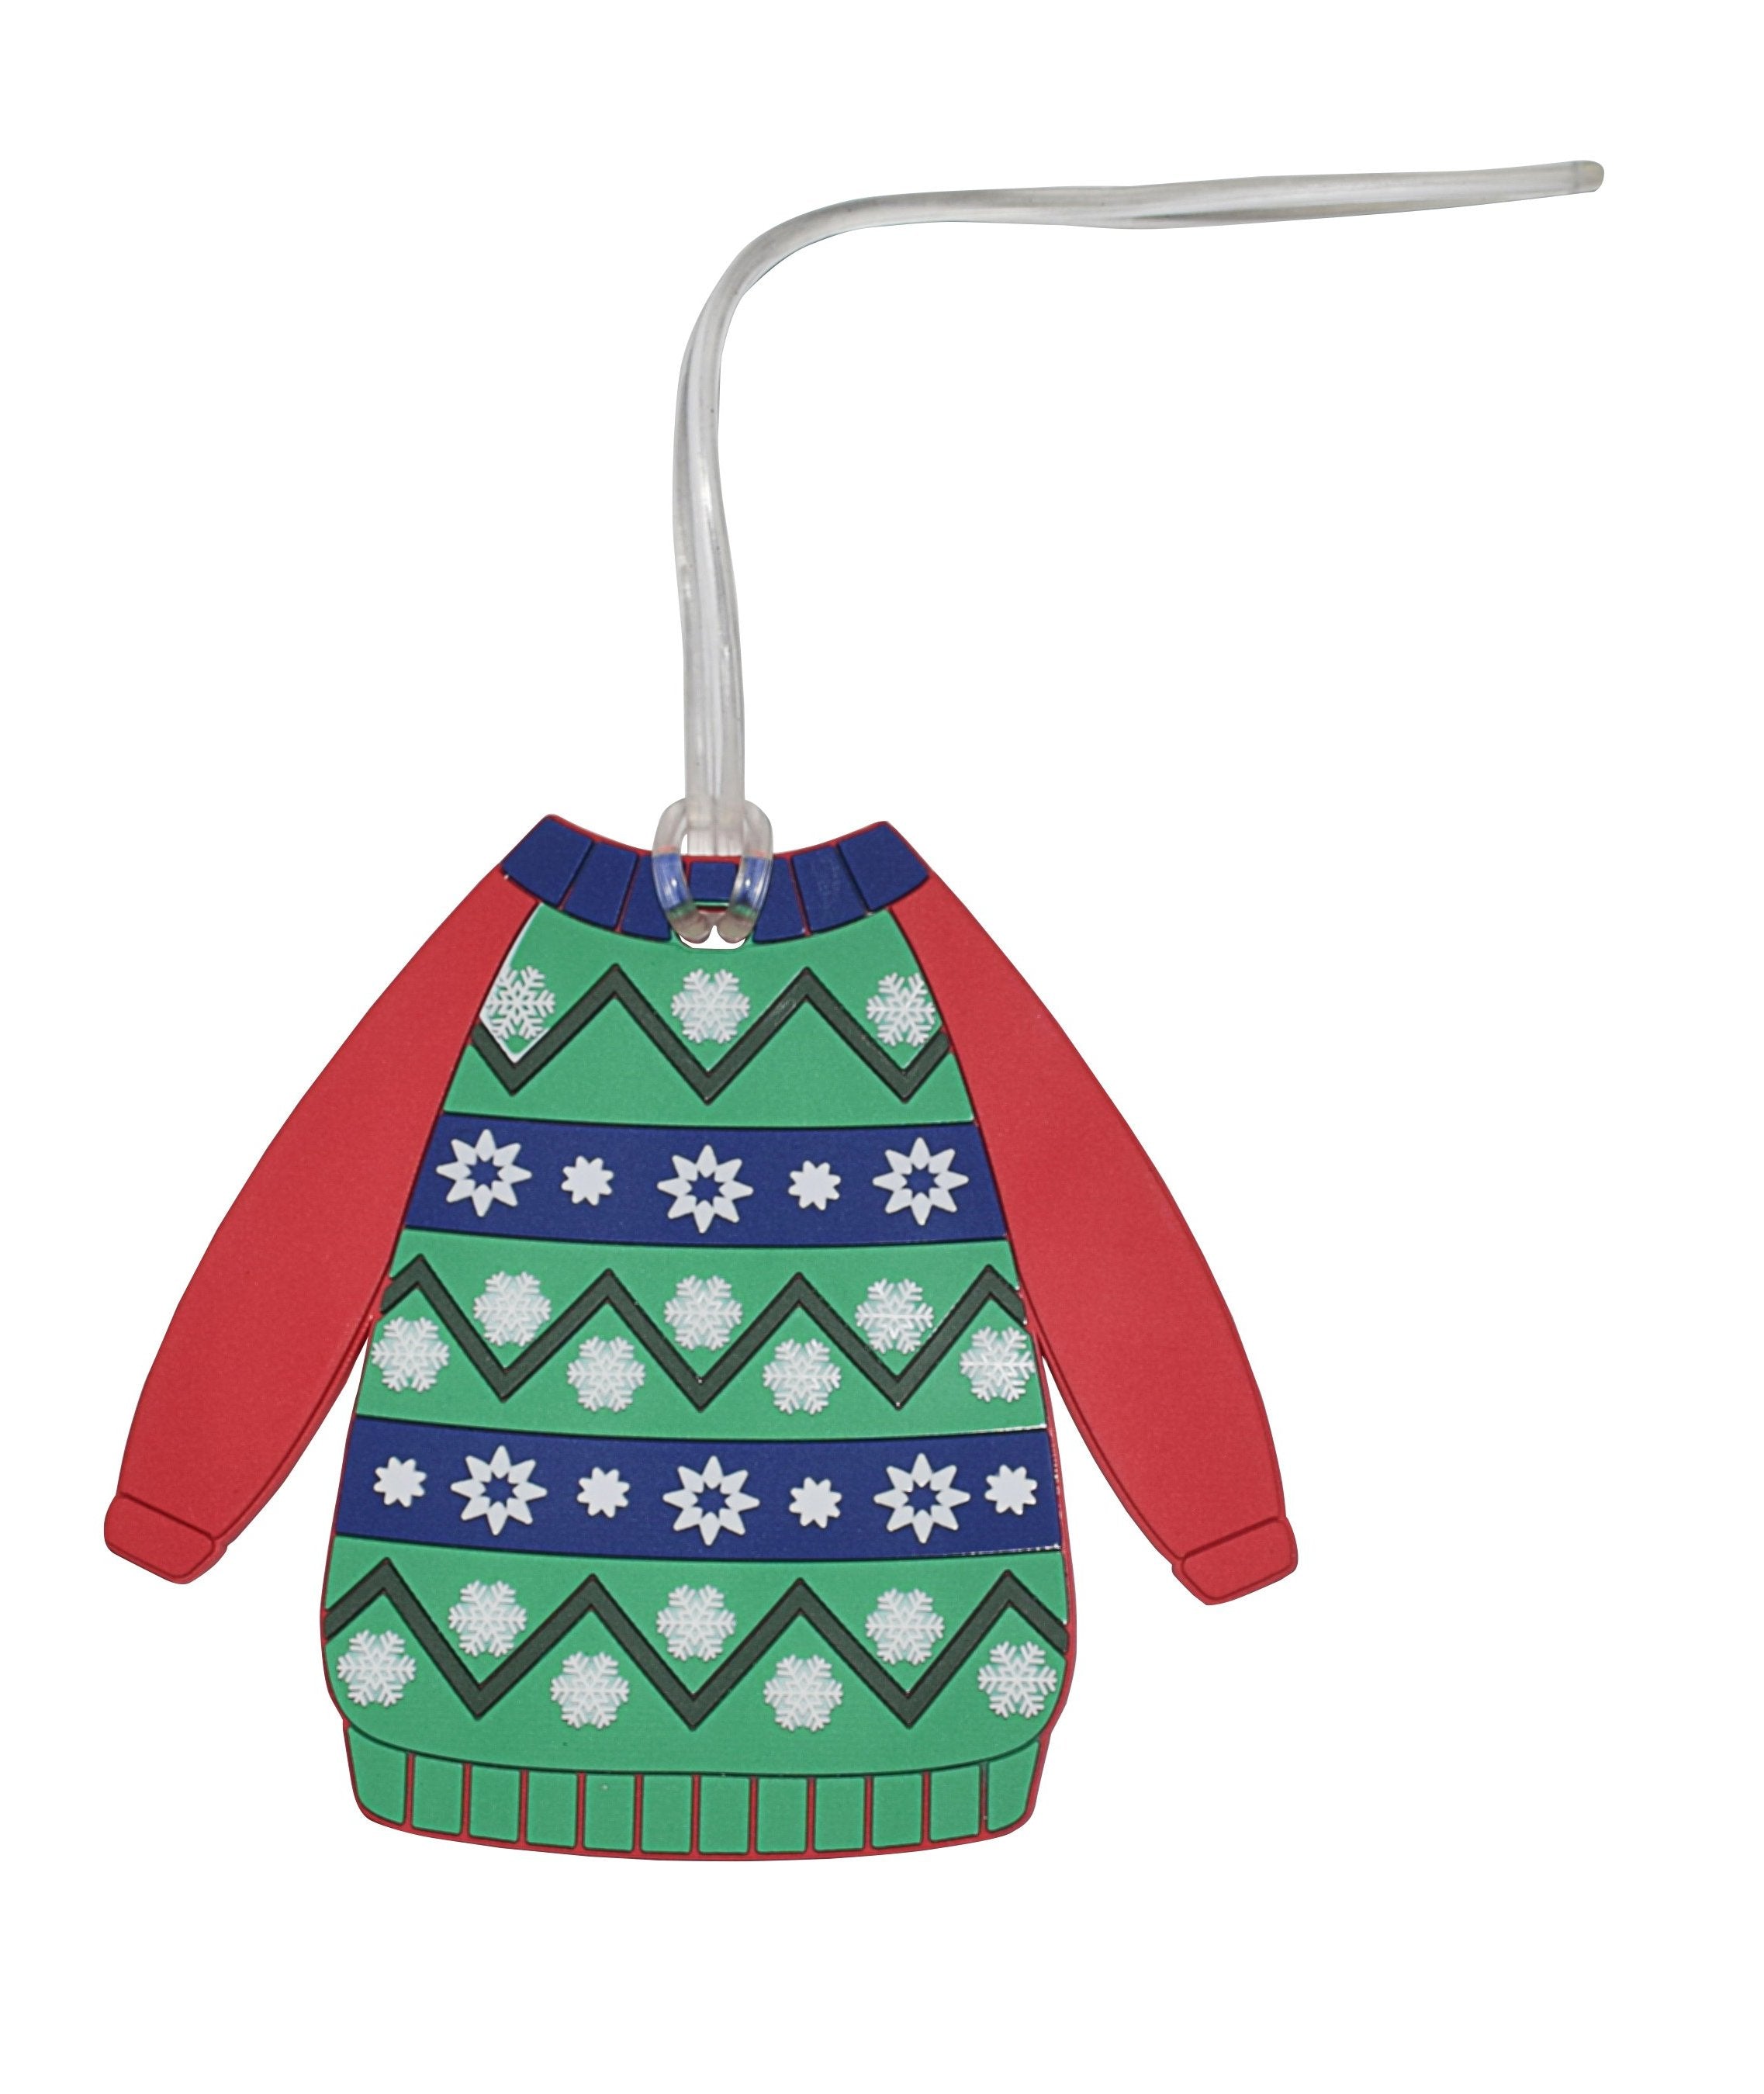 Silicone Holiday Luggage Tag Stripe Ugly Christmas Sweater